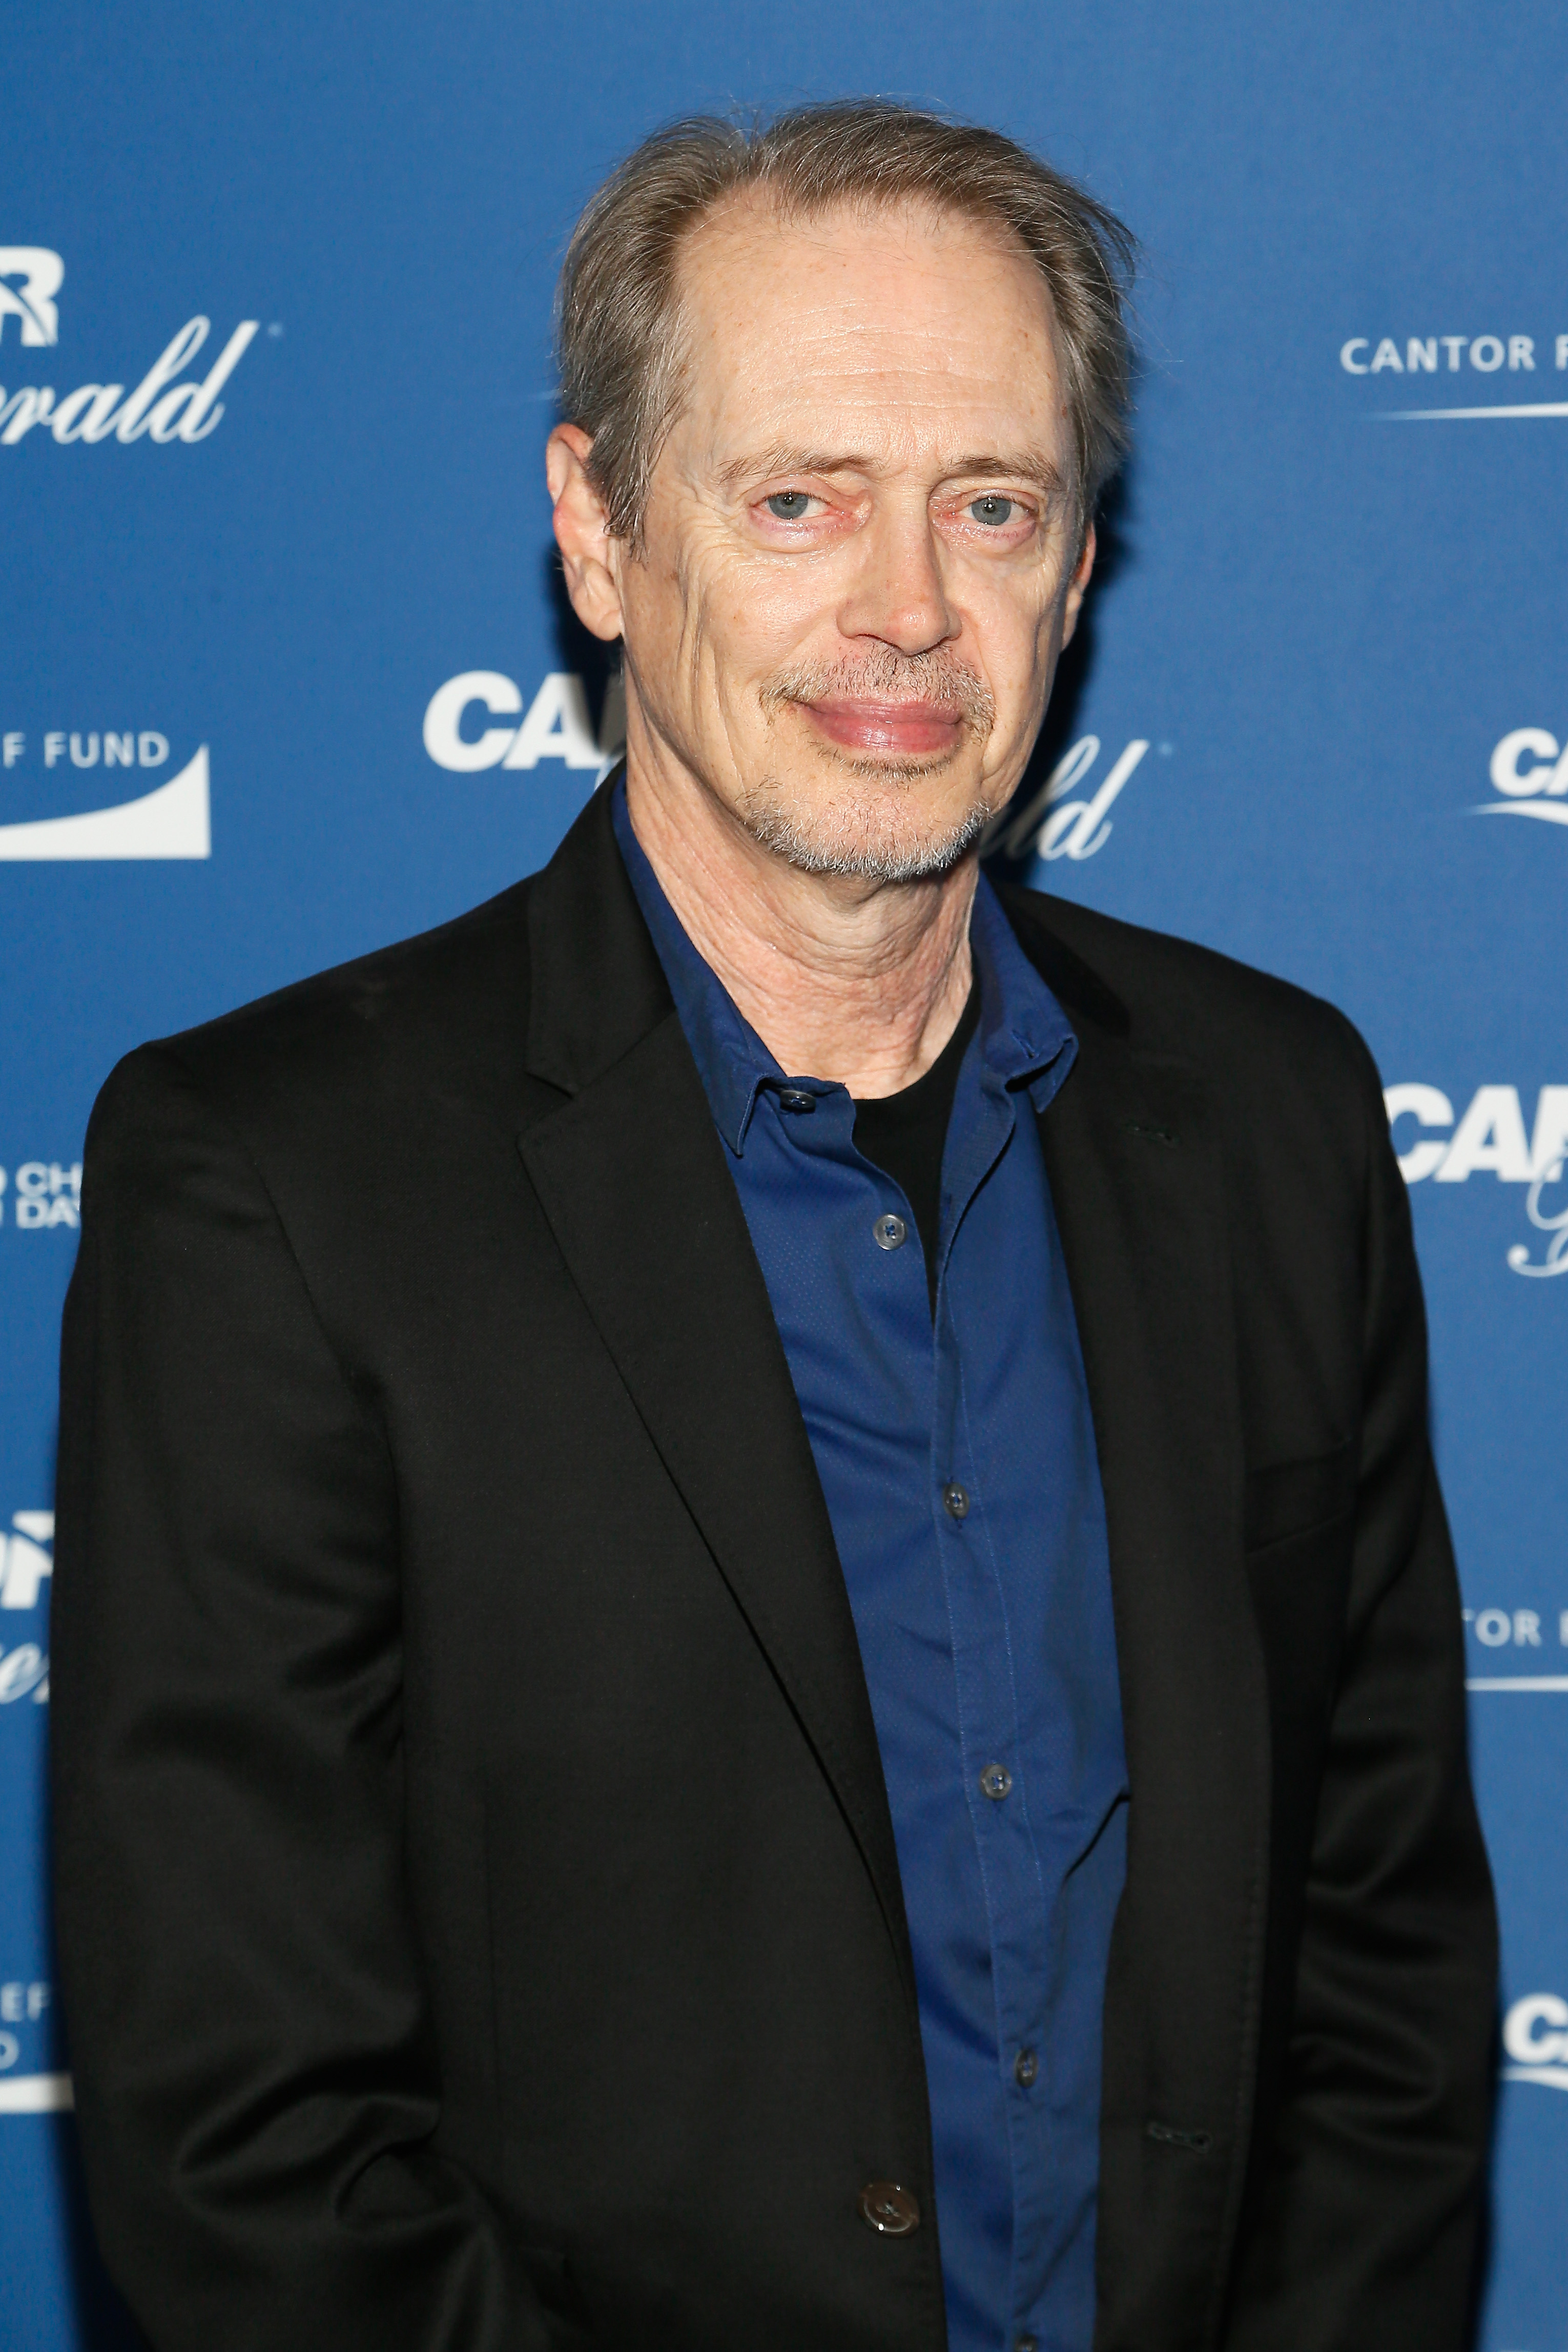 Actor Steve Buscemi attends Annual Charity Day hosted by Cantor Fitzgerald, BGC and GFI at Cantor Fitzgerald on September 11, 2017 in New York City. | Source: Getty Images